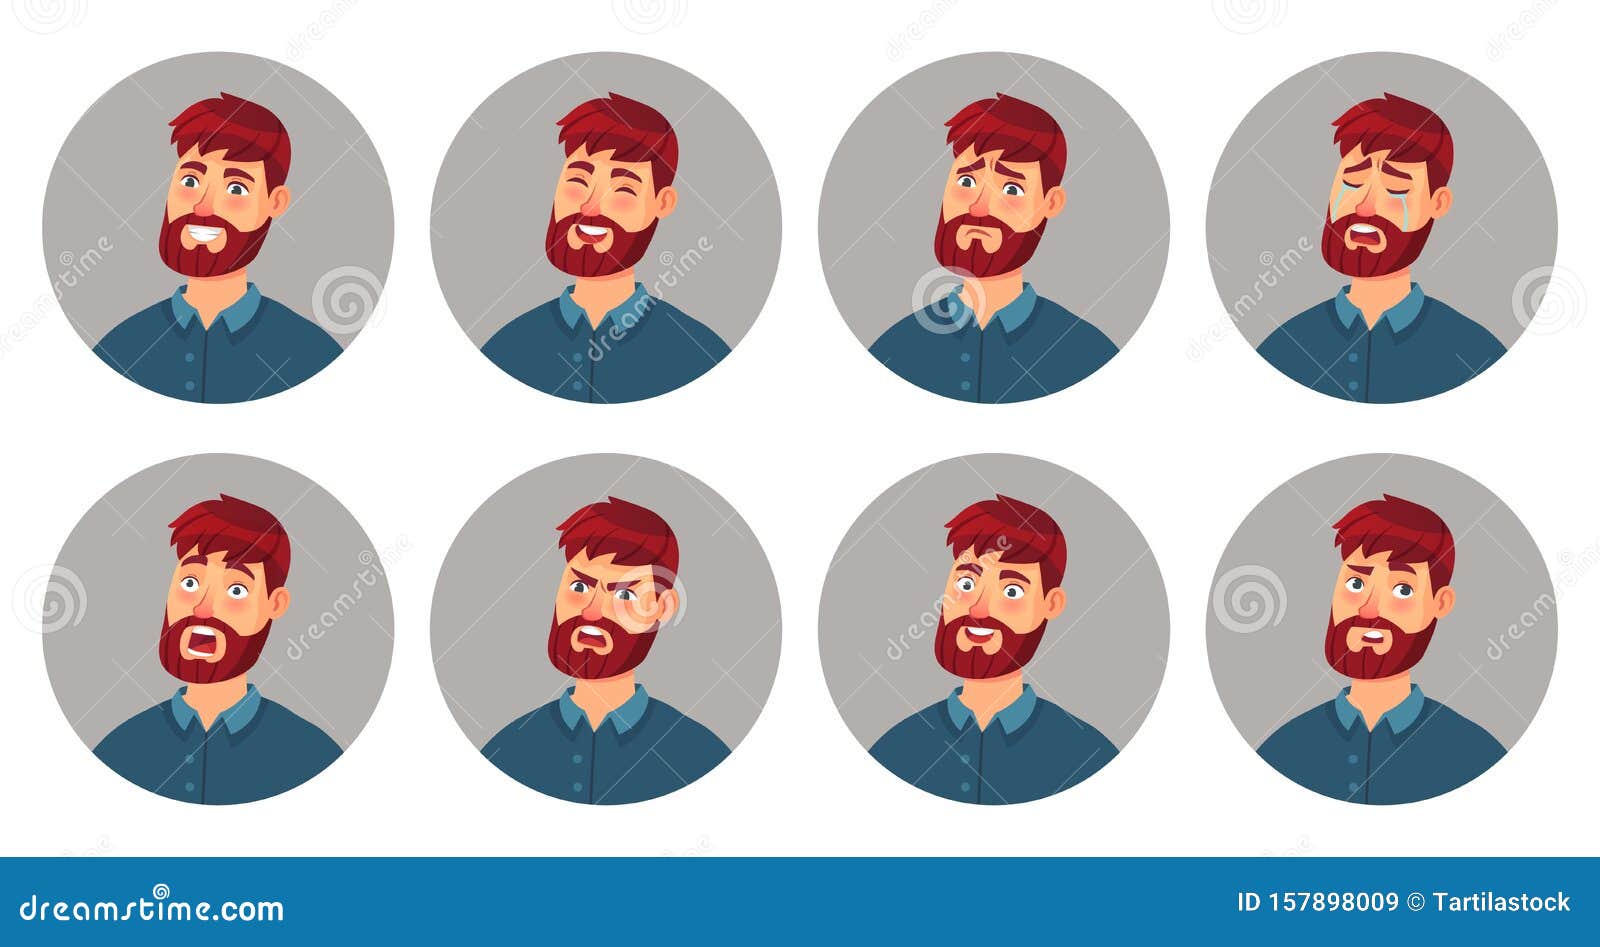 male character facial emotions. happy smiling man face, angry expression and different emotion faces cartoon 